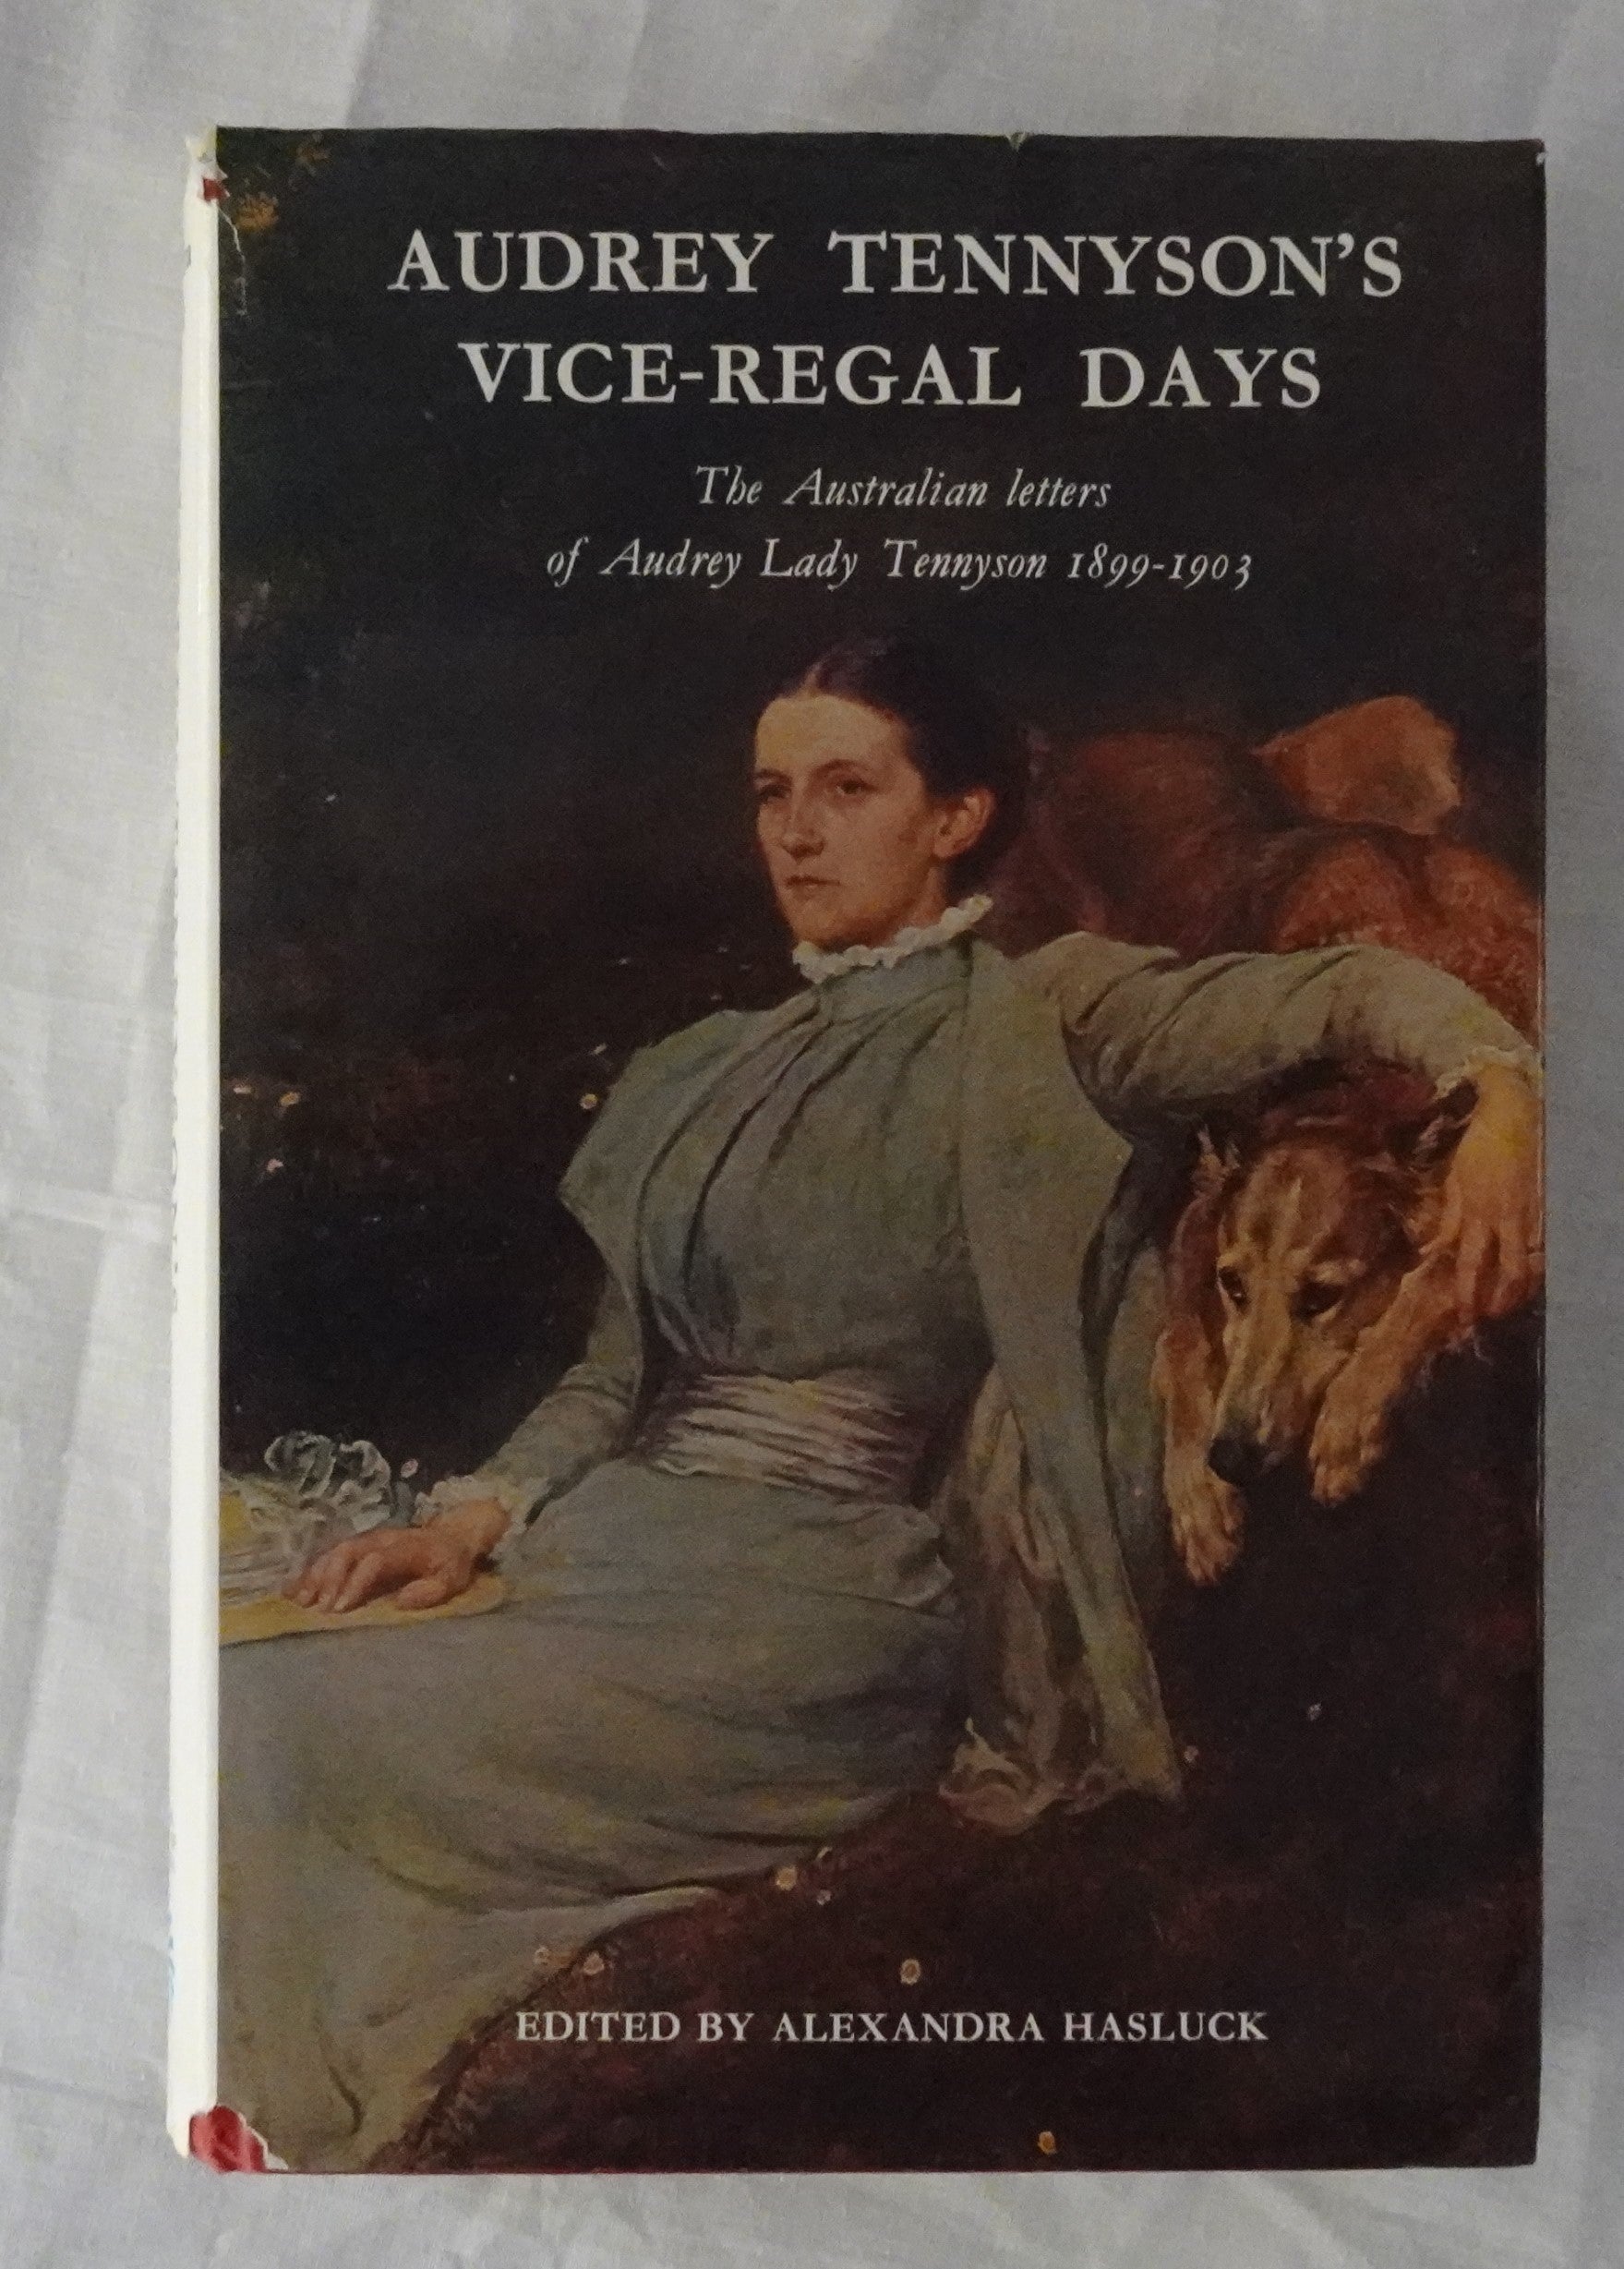 Audrey Tennyson’s Vice-Regal Days  The Australian Letters of Audrey Lady Tennyson to her mother Zacyntha Boyle, 1899-1903  Edited by Alexandra Hasluck